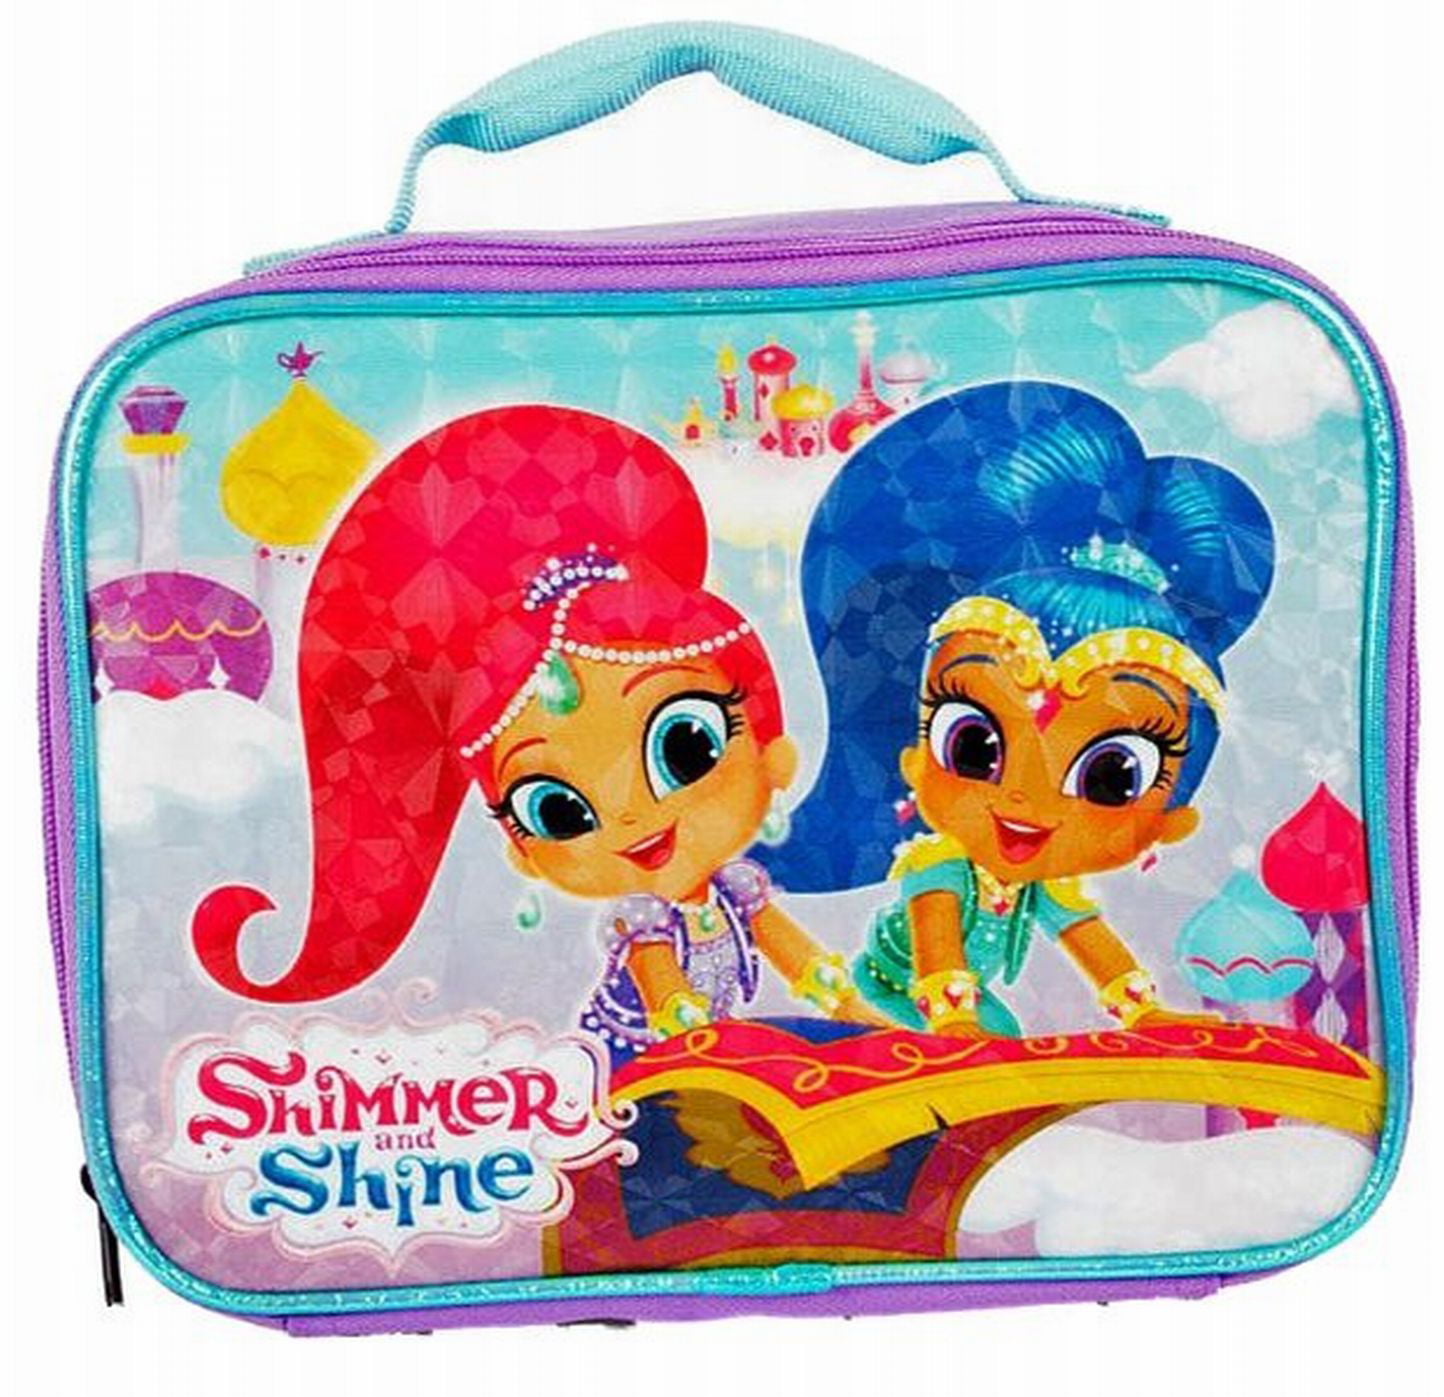 SHIMMER AND SHINE INSULATED THERMAL LUNCH BAG HANDLE BOX SCHOOL PINK GIRLS NICK 